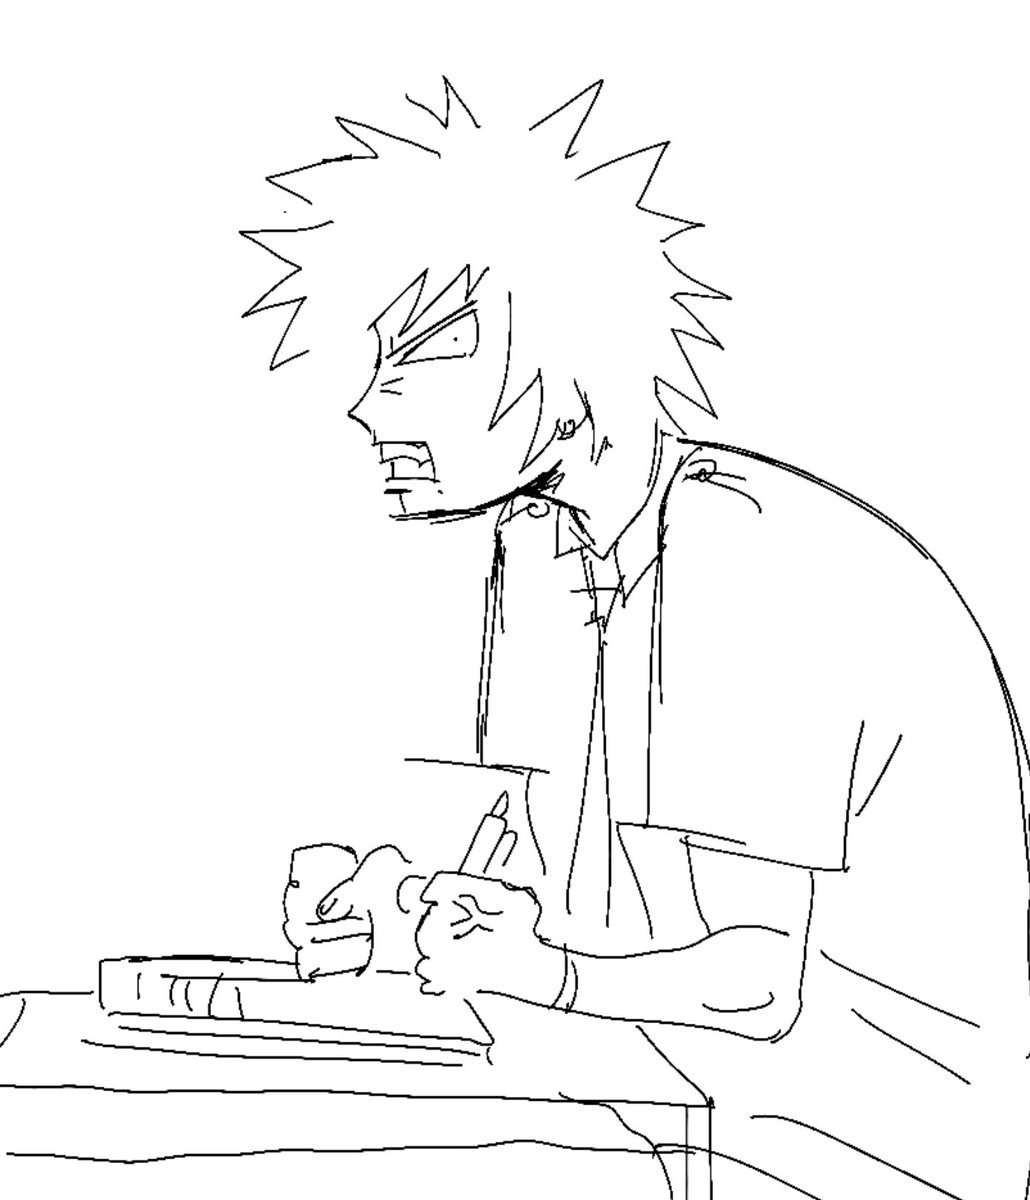 class 1a is strong because if i had to sit next to him for biology i’d cry my eyes out